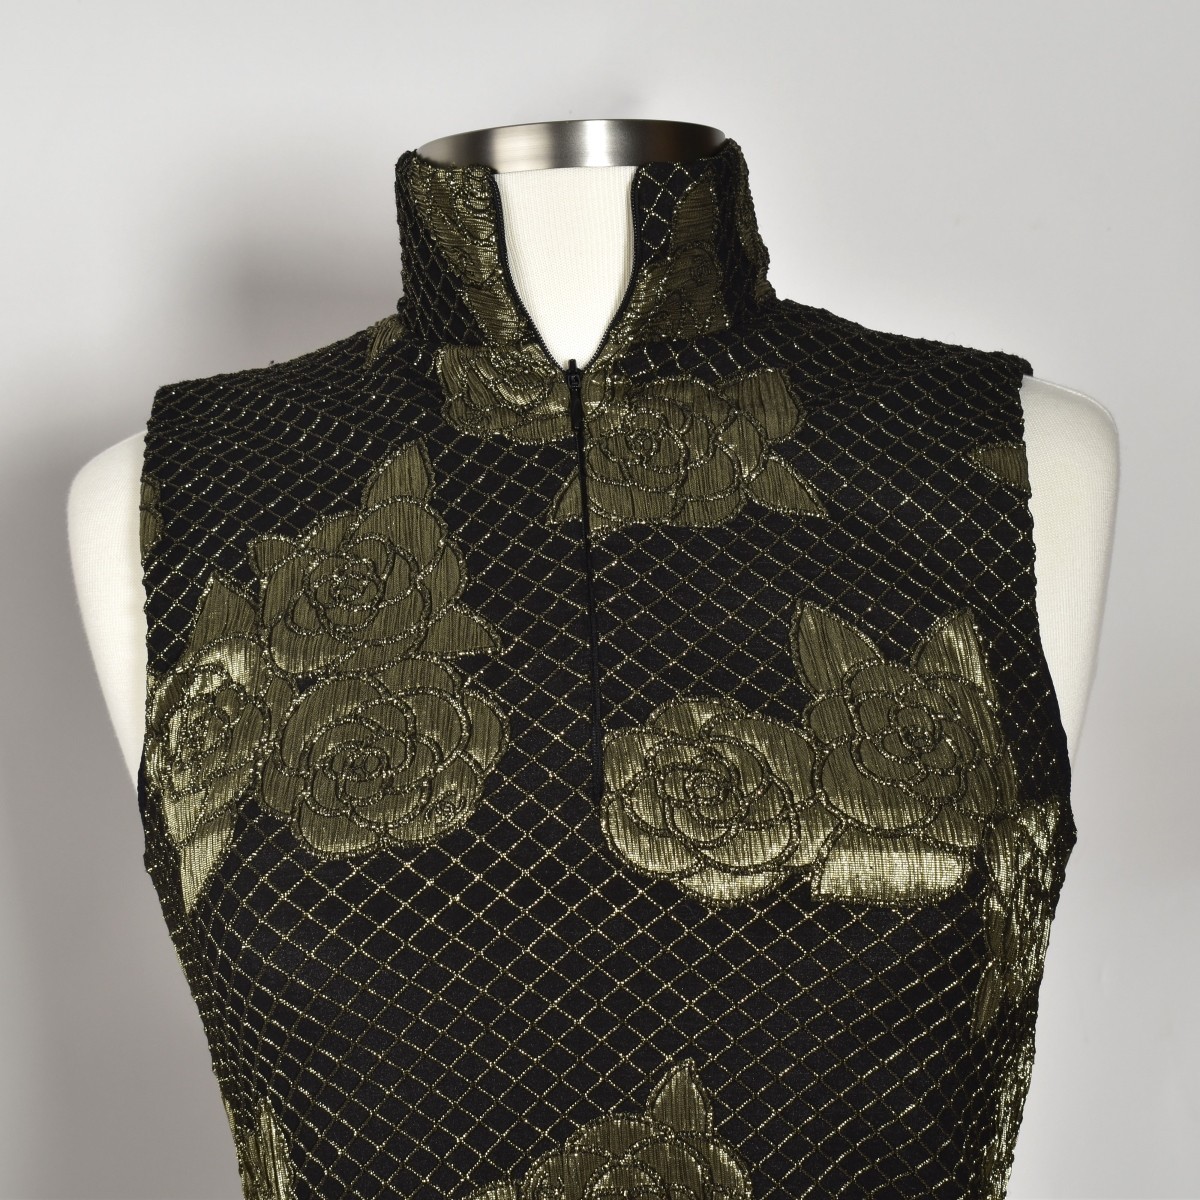 Chanel Black and Gold Sleeveless Top